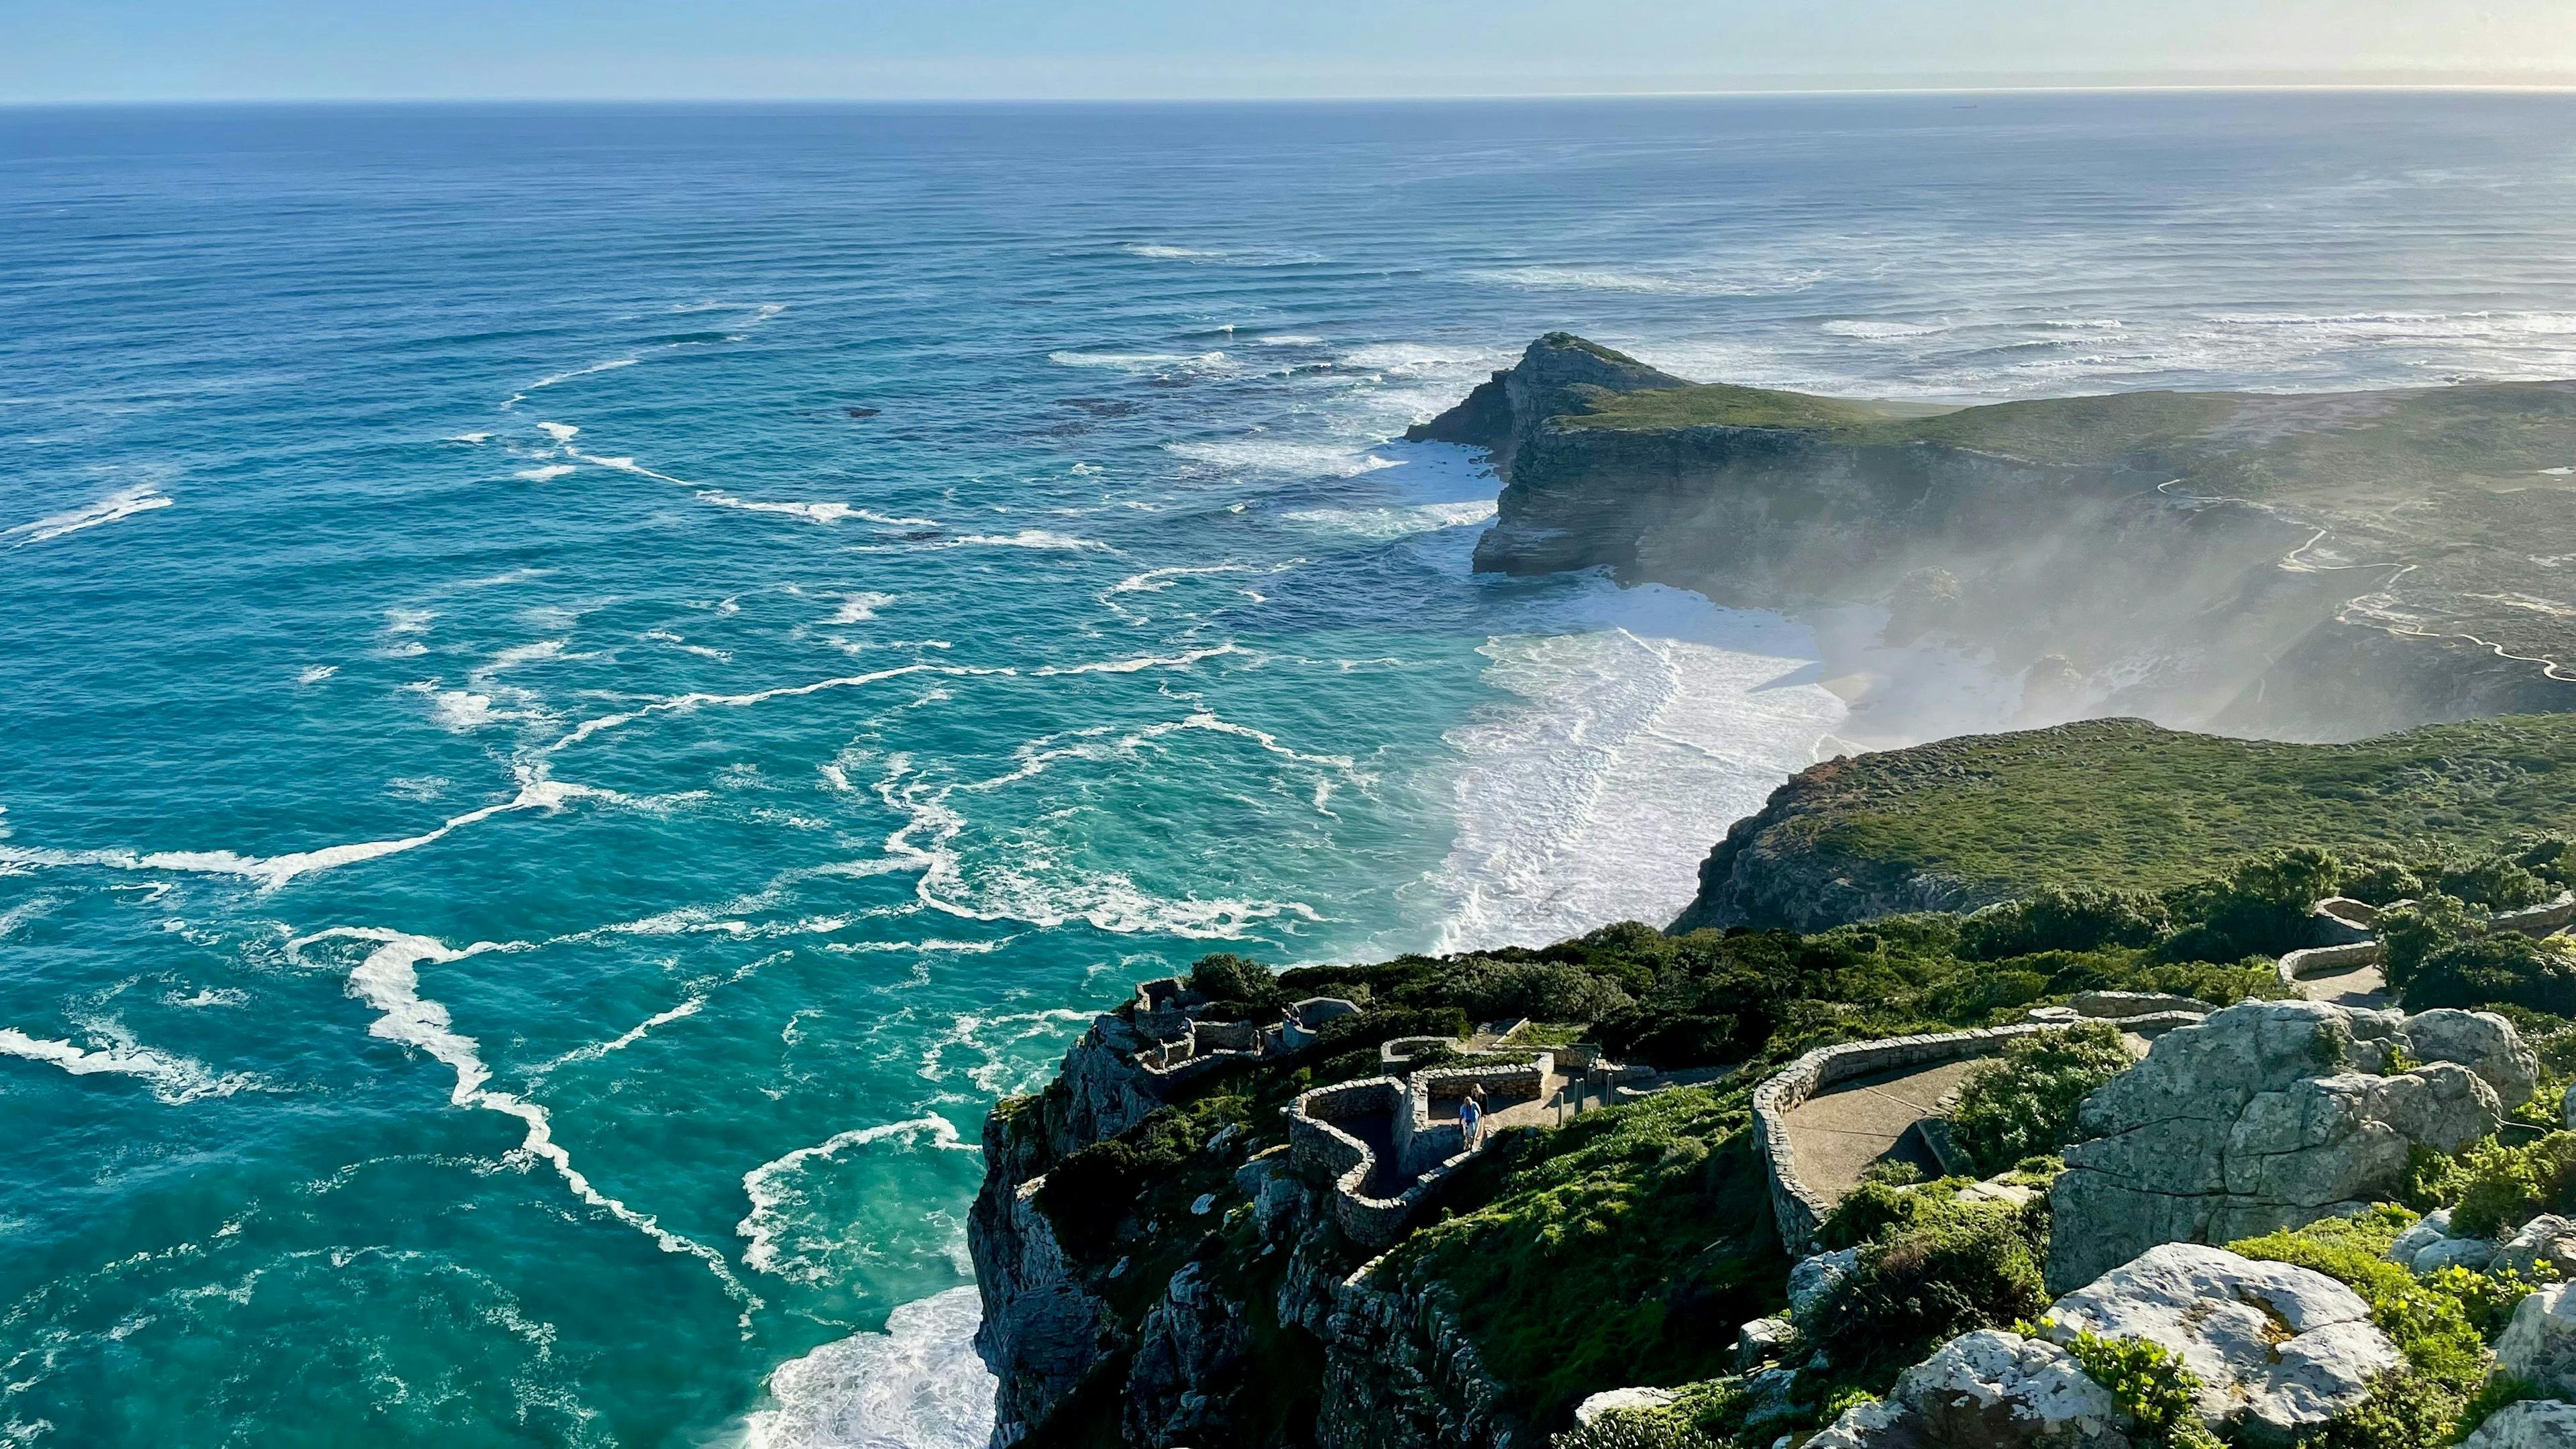 Cape of Good Hope on Cape Peninsula, South Africa